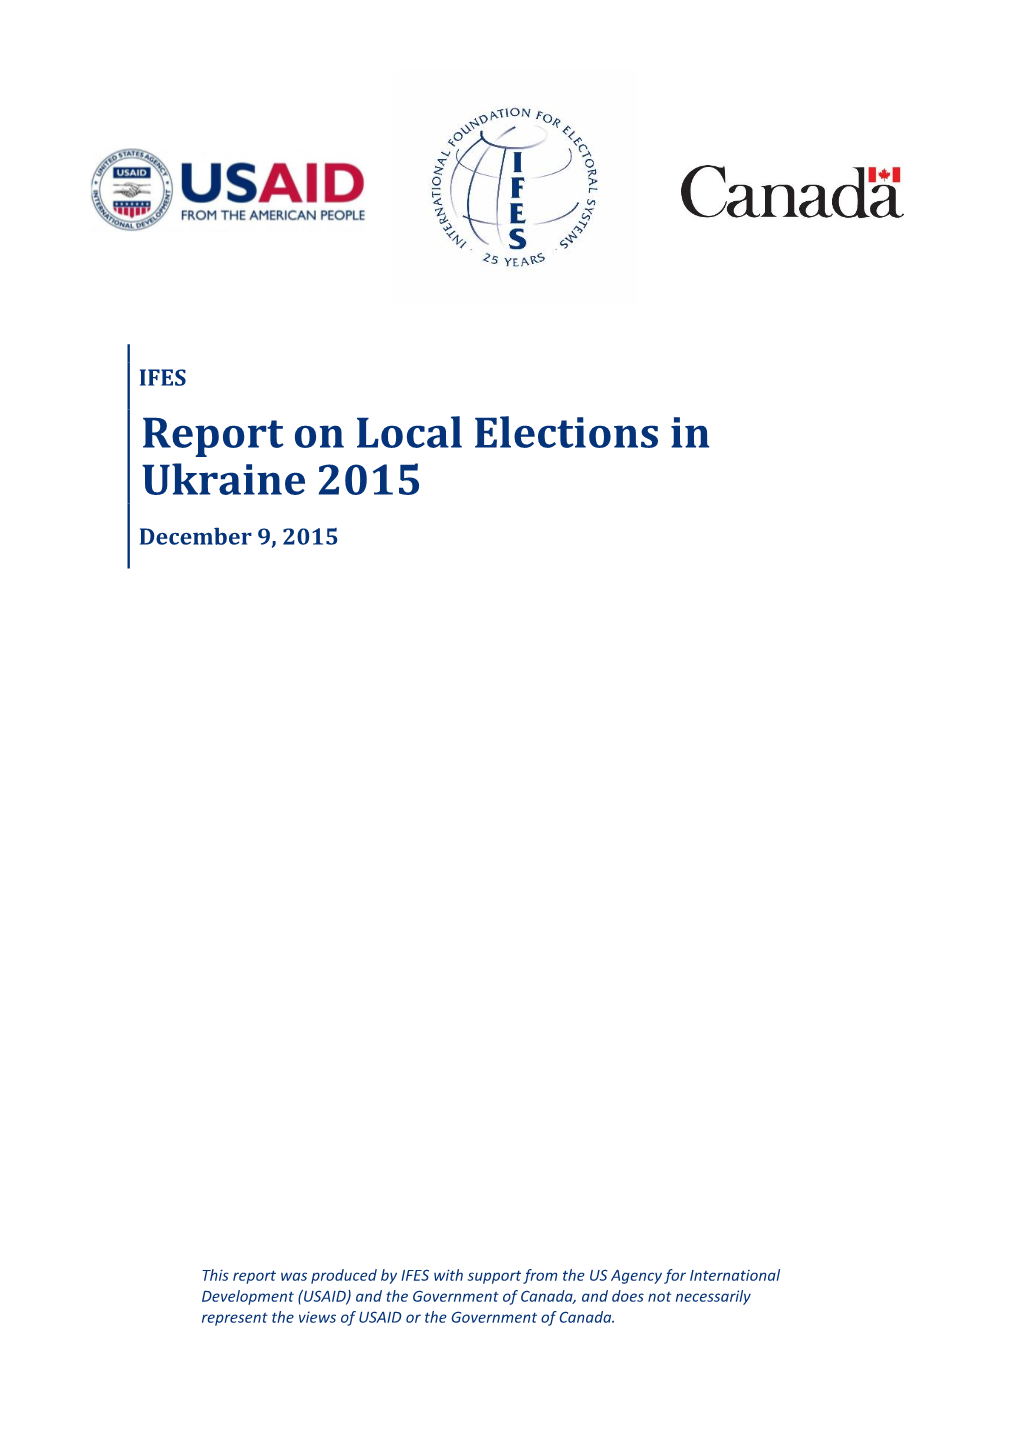 Report on Local Elections in Ukraine 2015